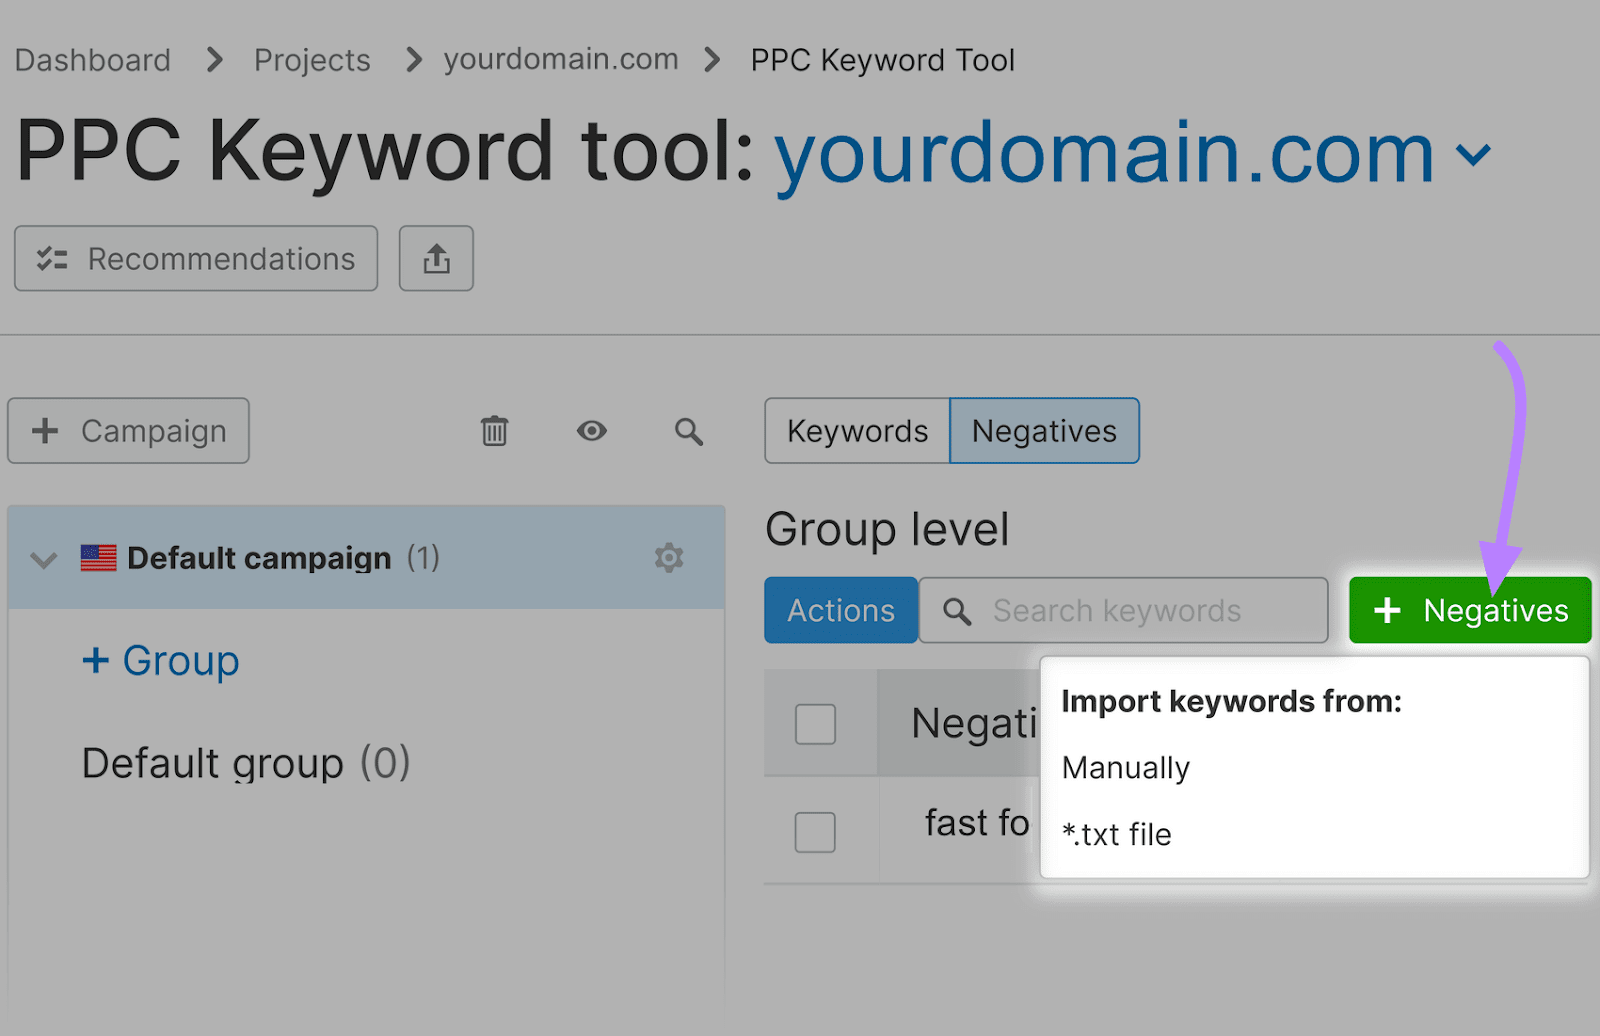 Select how you want to add negative keywords to PPC Keyword Tool